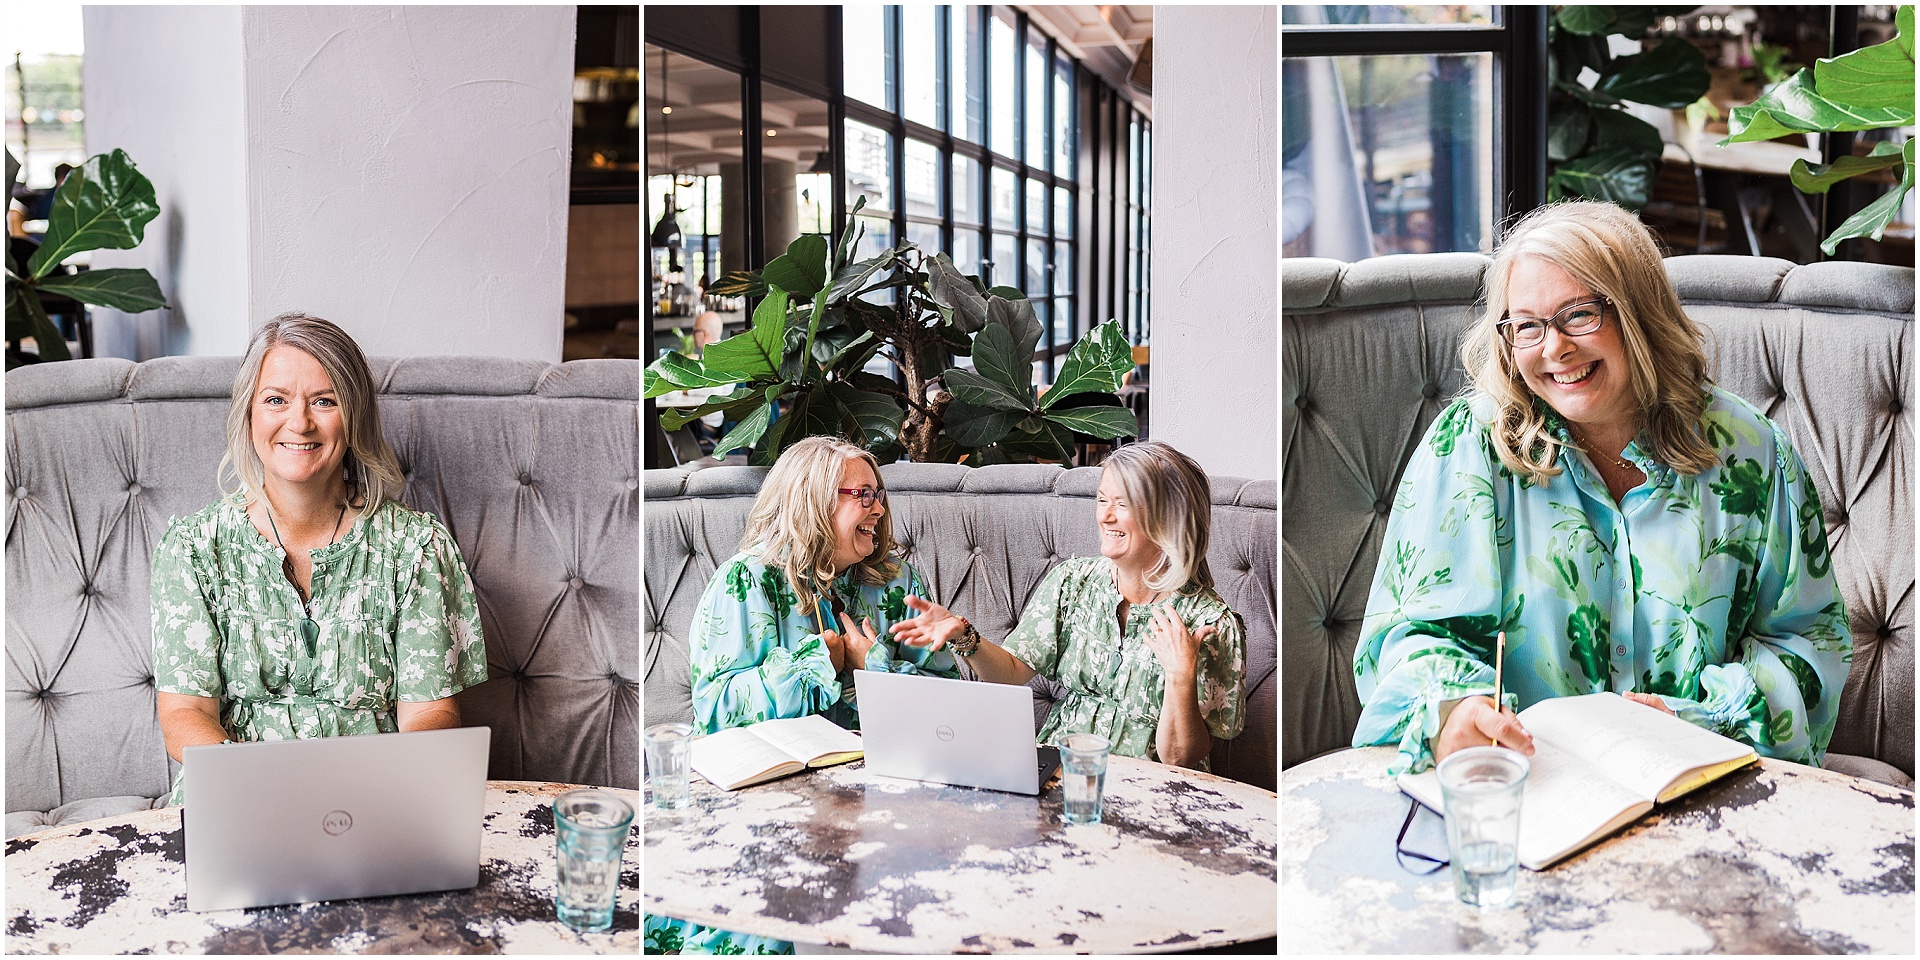 Brand shoot in a cafe in London with entrepreneur Sam and Fiona - images by London brand photographer AKP Branding Stories